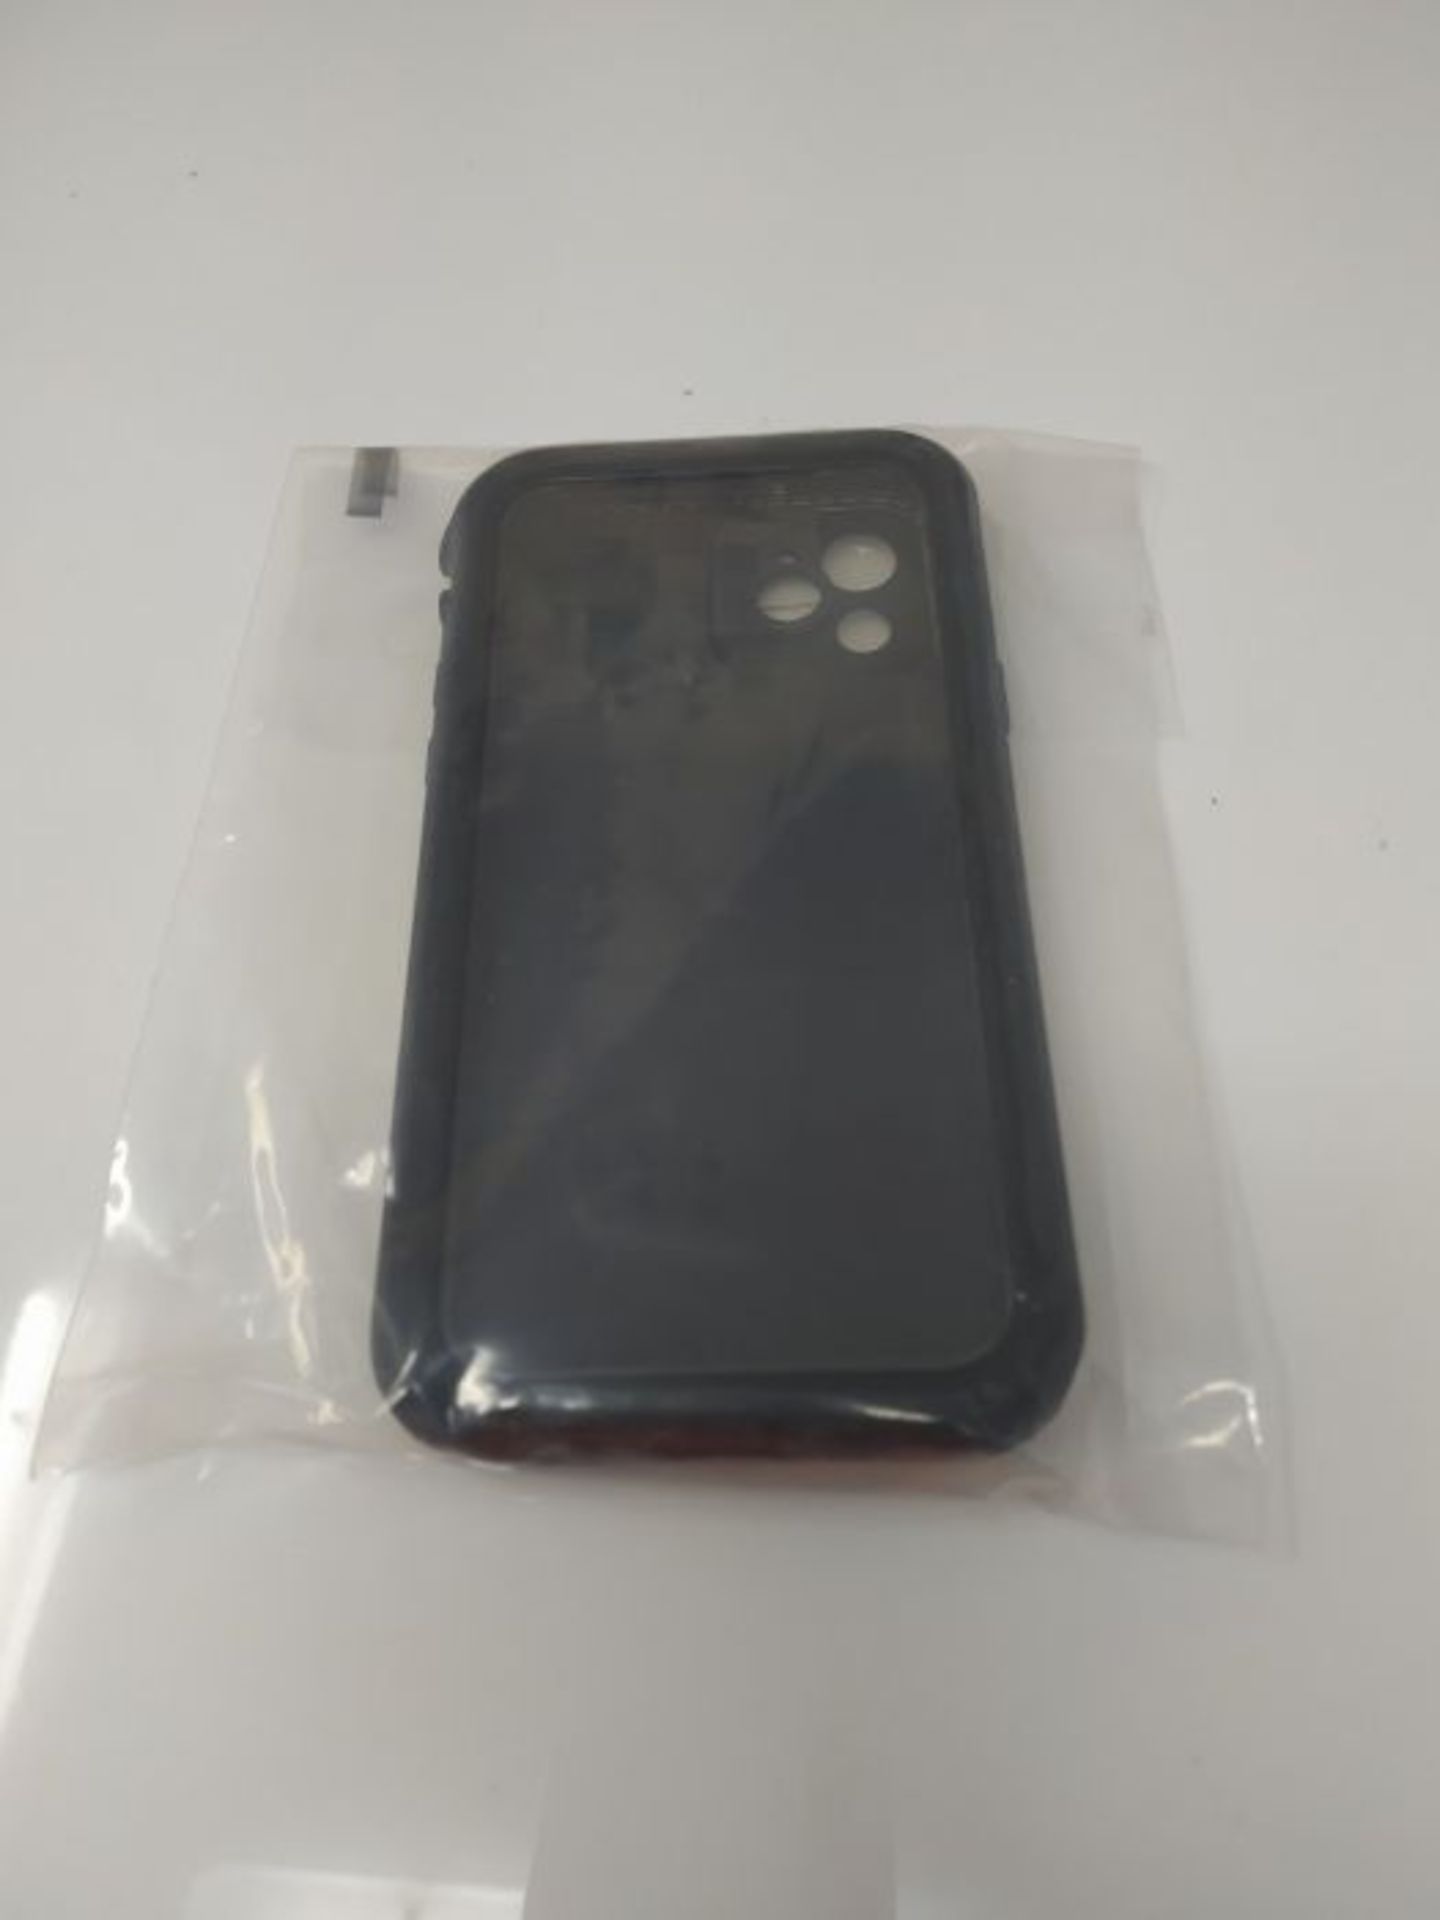 RRP £69.00 LifeProof for iPhone 12, Waterproof Drop Protective Case, Fre Series, Black - Image 2 of 2